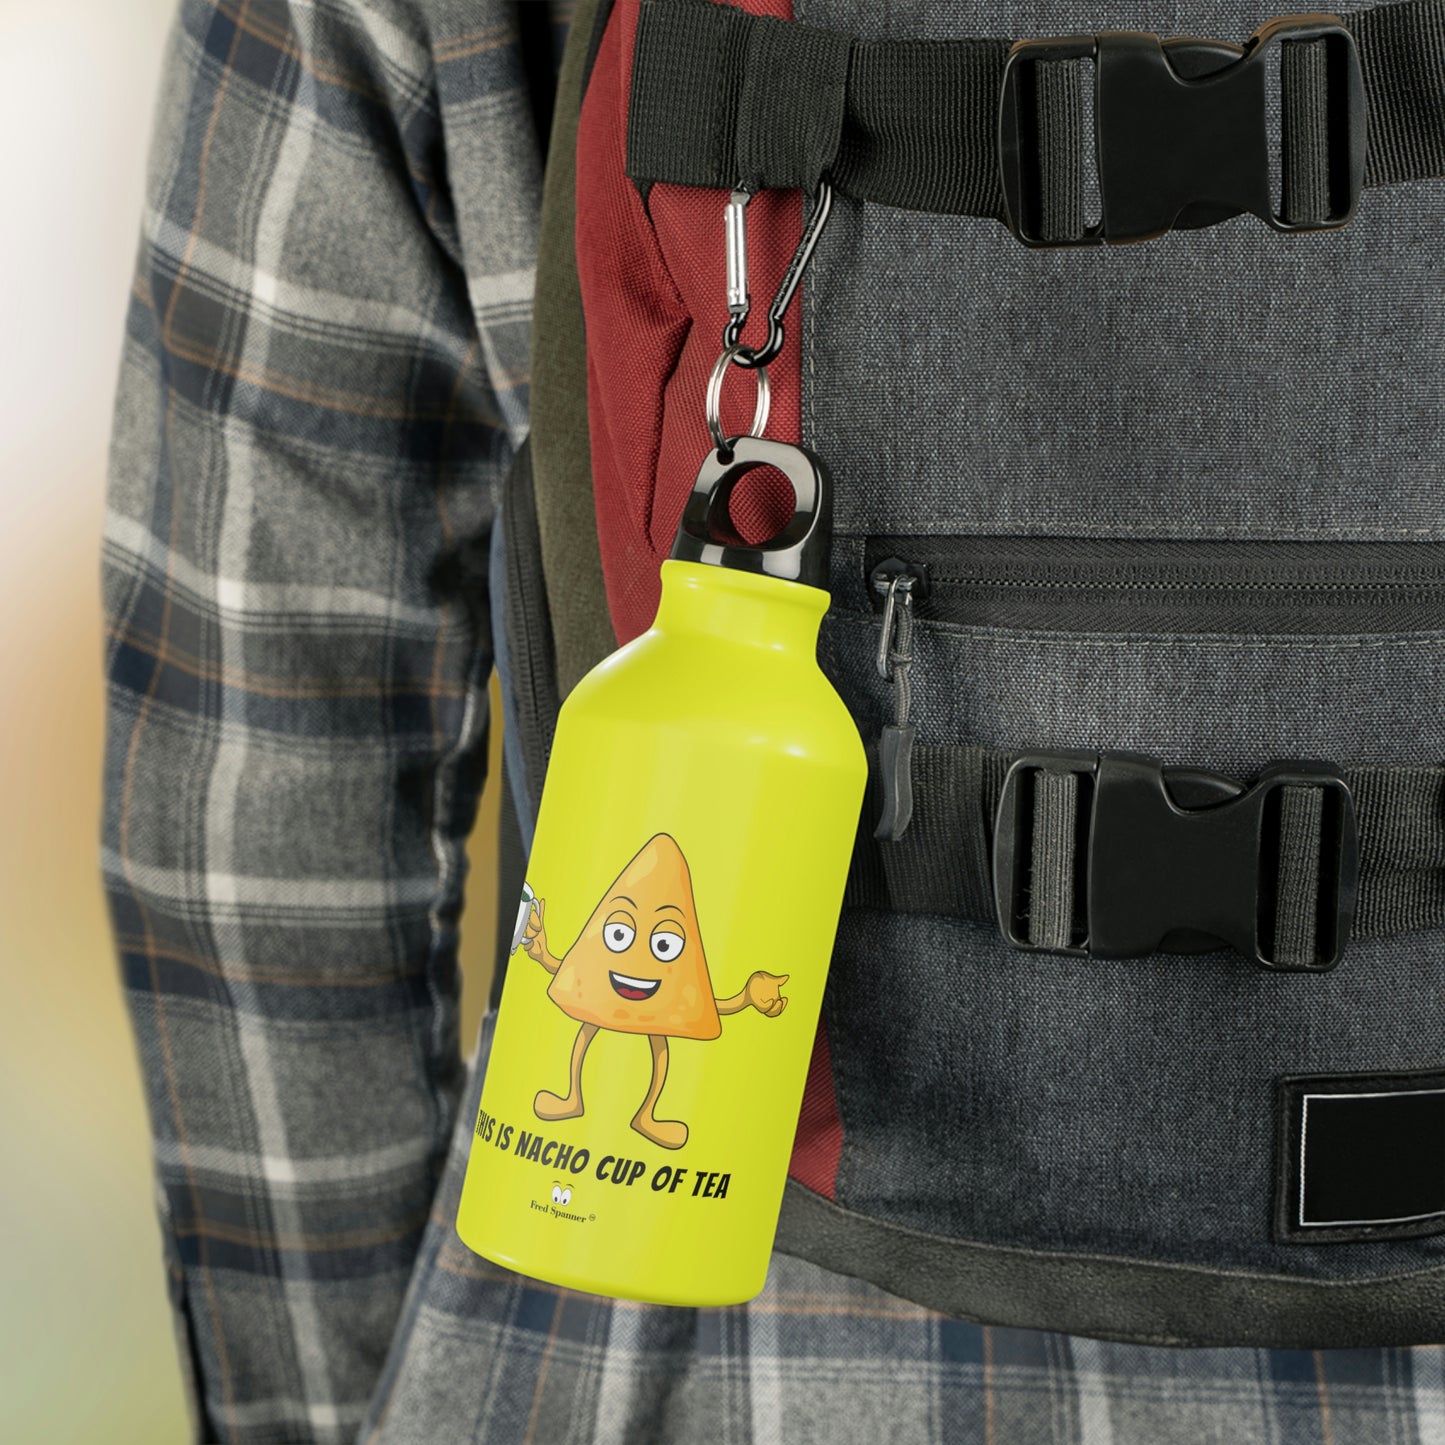 This is nacho cup of tea- sport bottle